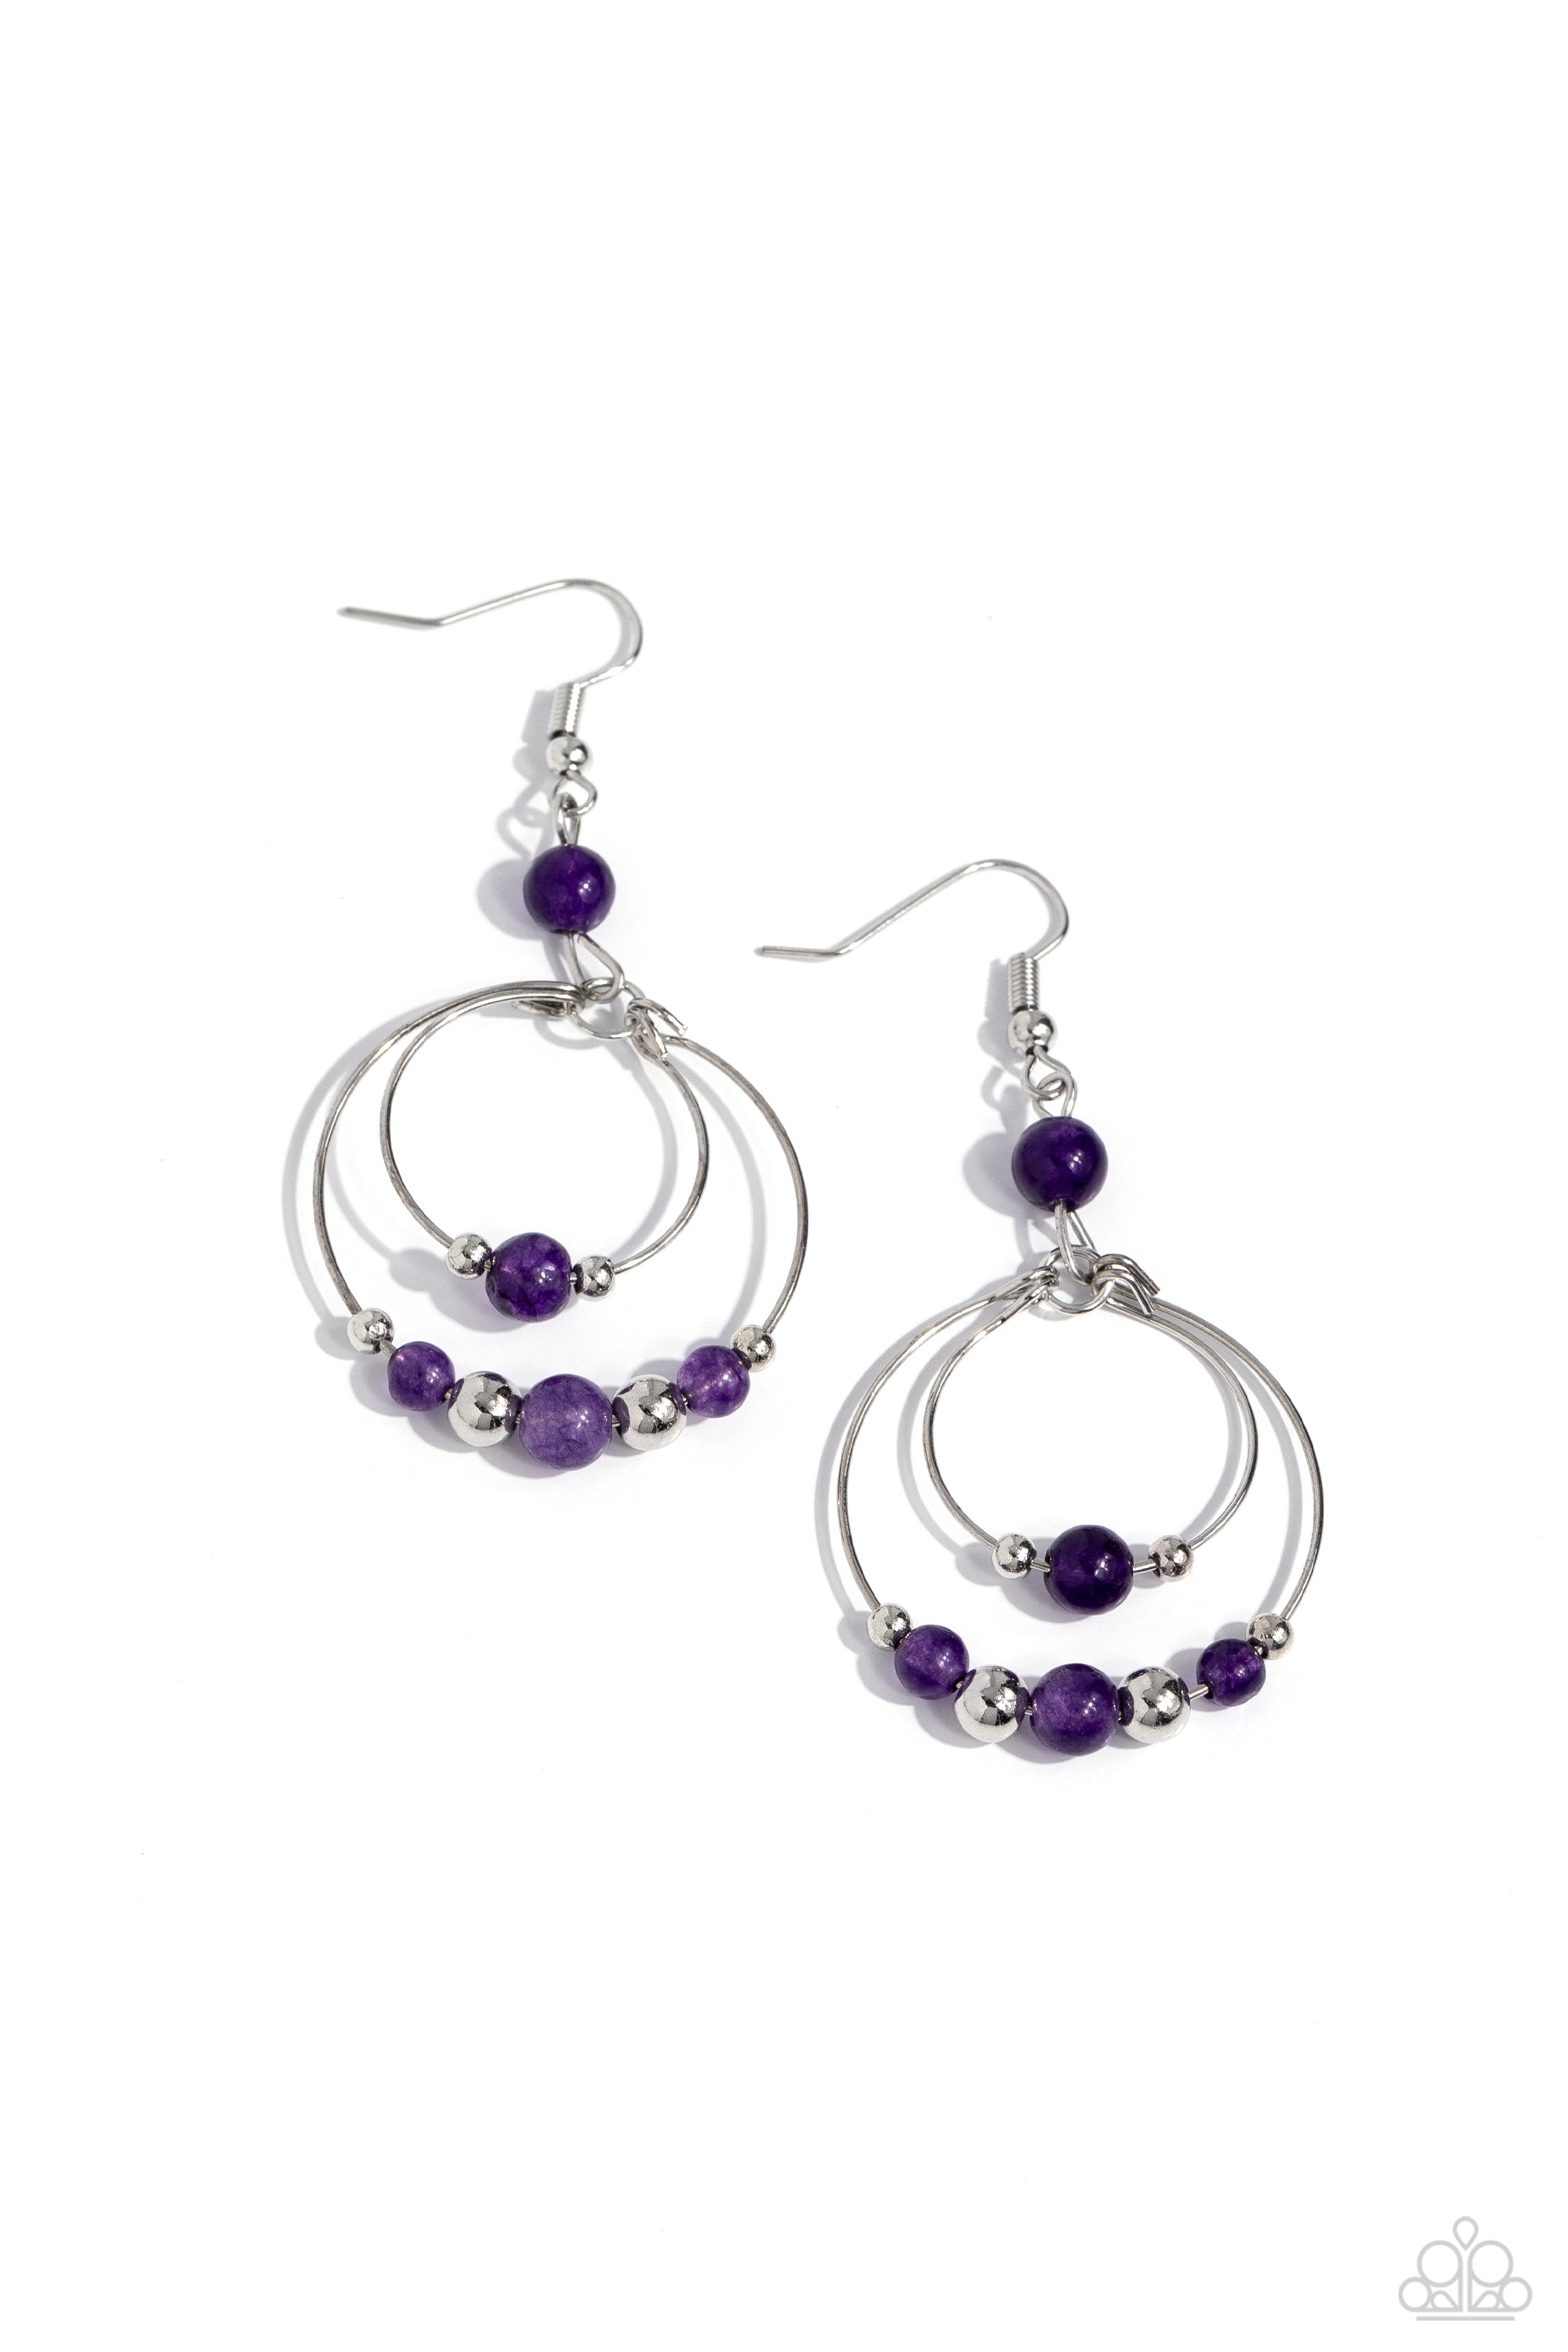 Eco Eden Purple Amethyst Stone Earrings - Paparazzi Accessories- lightbox - CarasShop.com - $5 Jewelry by Cara Jewels